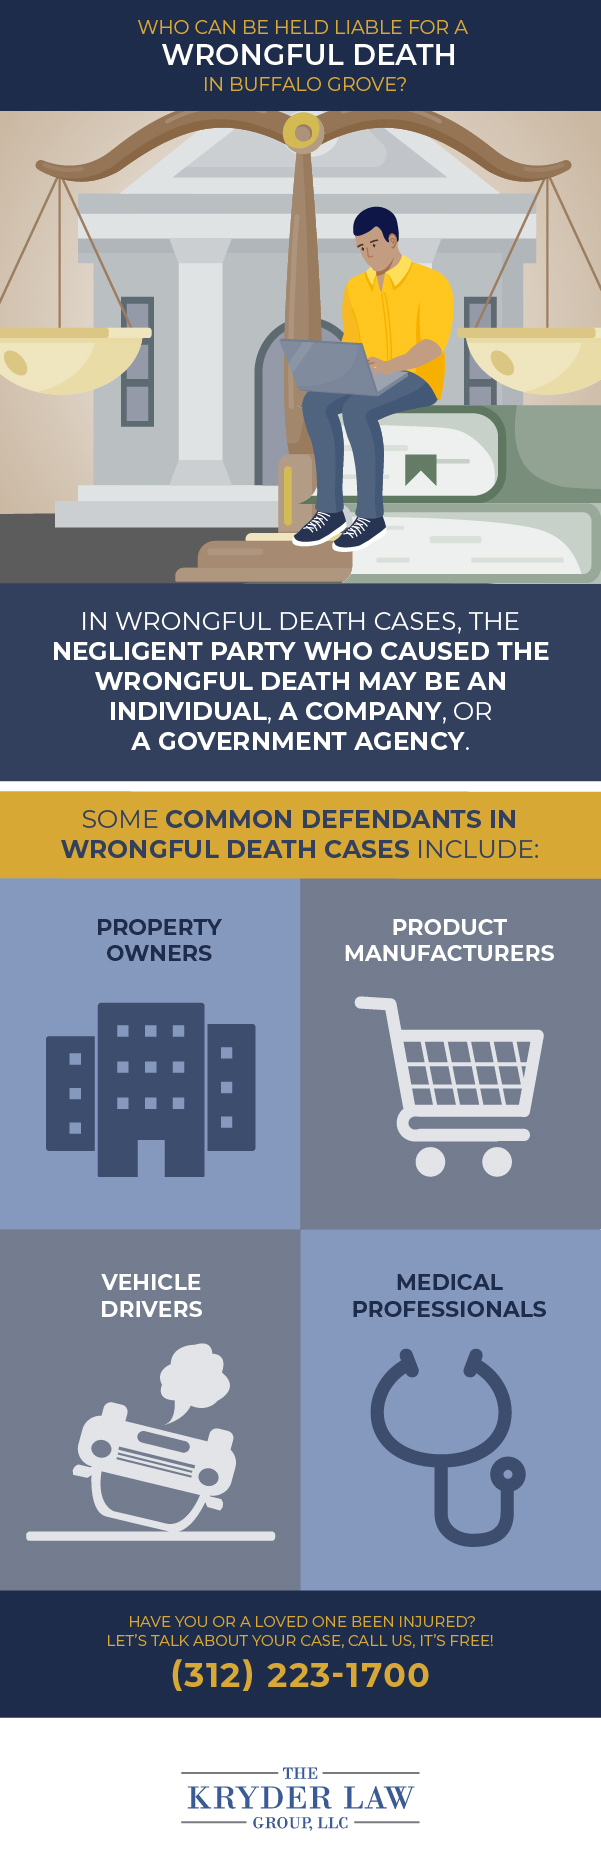 The Benefits of Hiring a Buffalo Grove Wrongful Death Lawyer Infographic